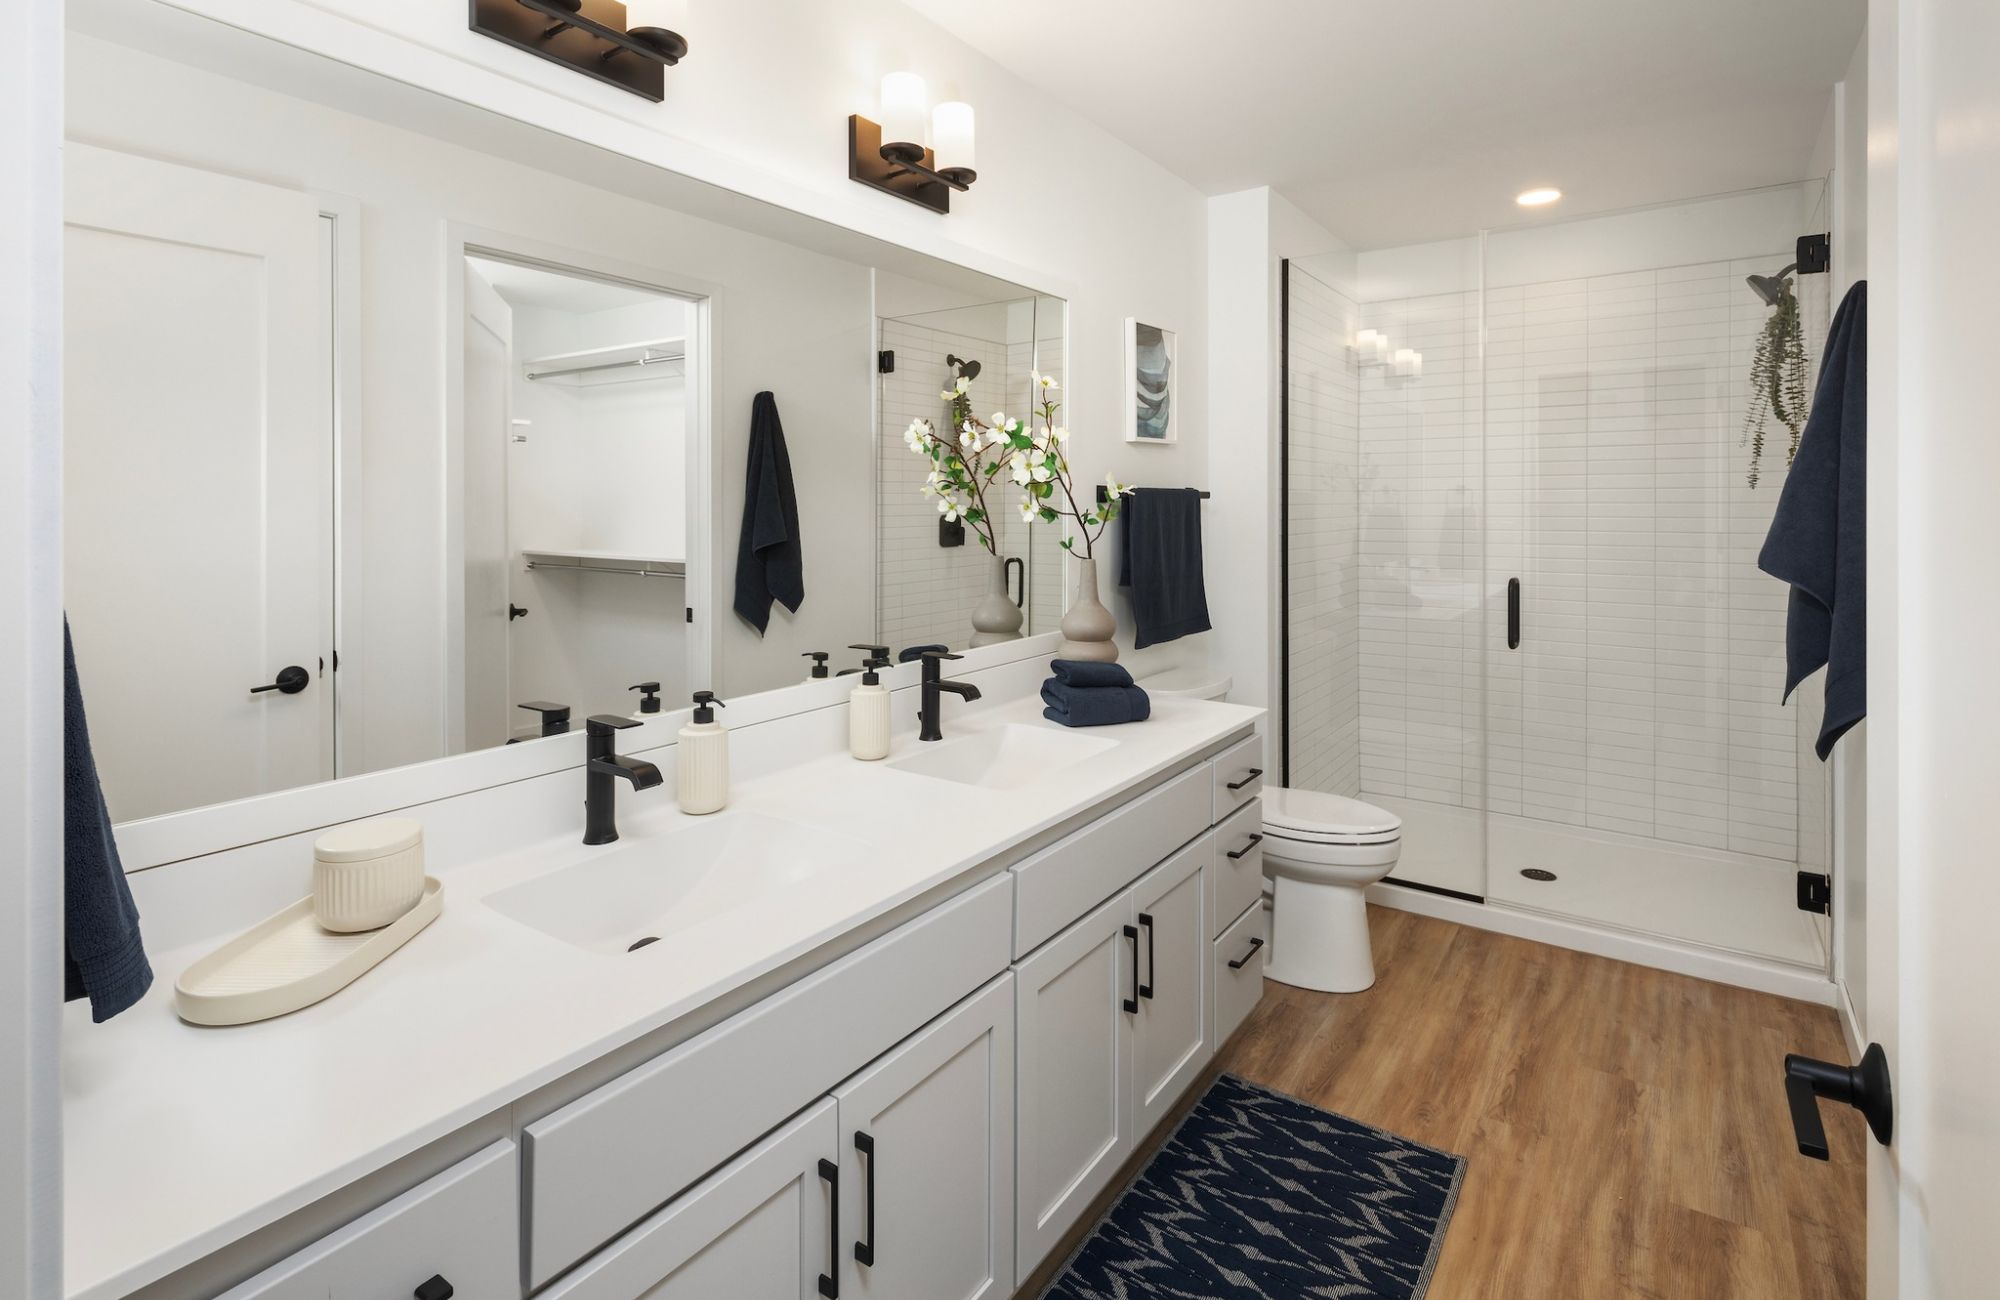 Moment apartments bathroom with beautiful white countertops, double sinks, and glass enclosed shower